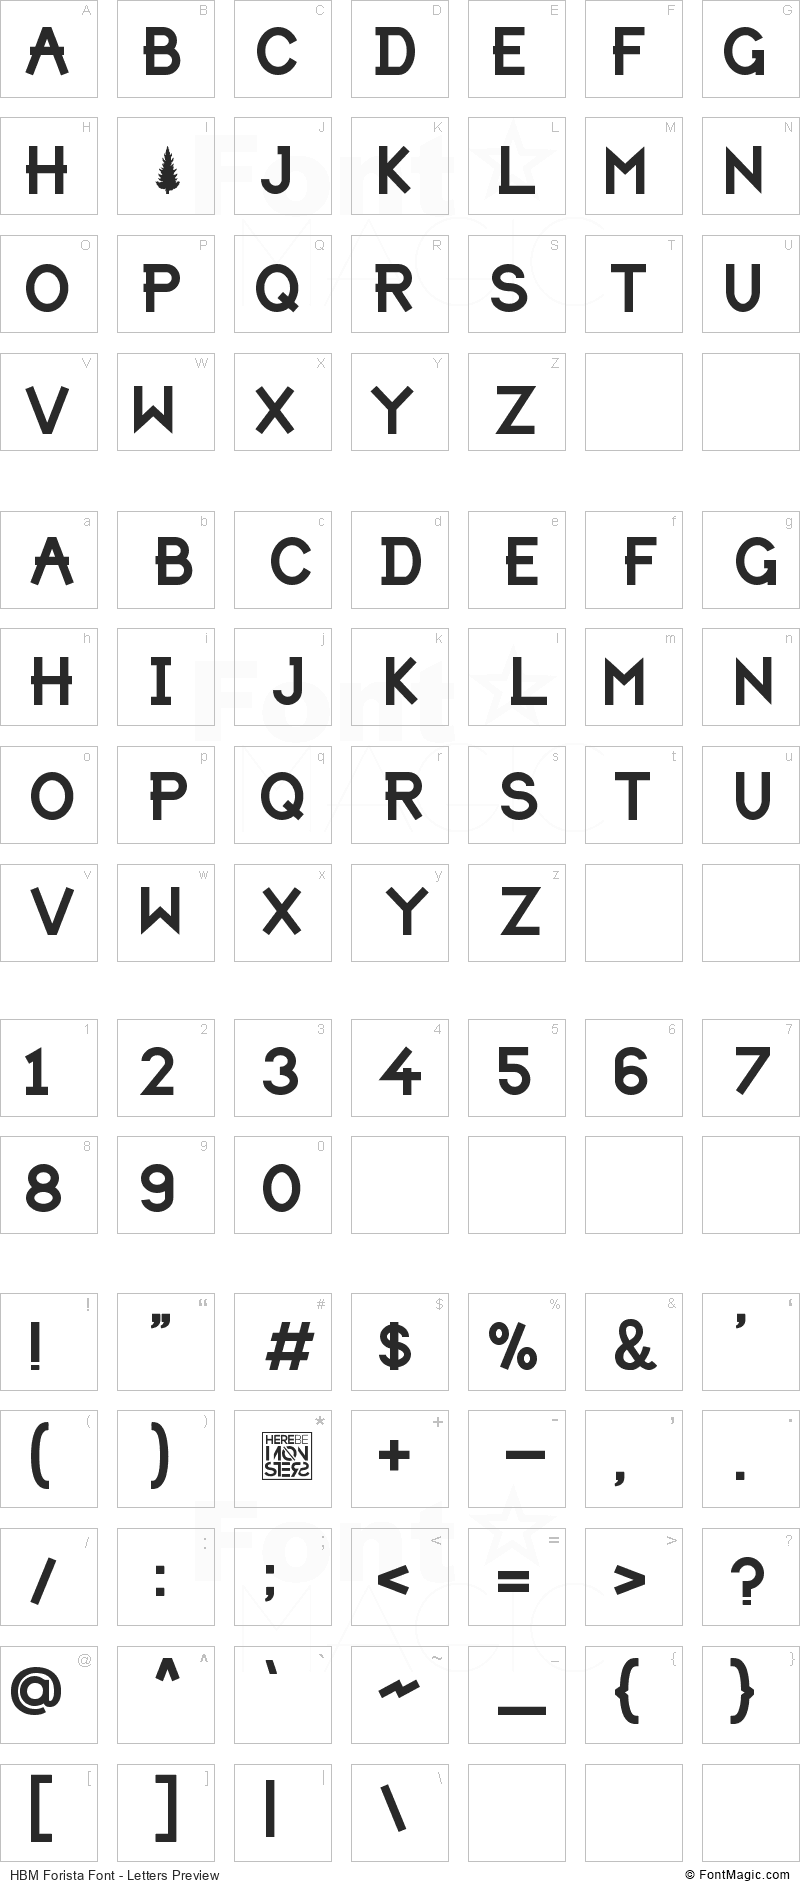 HBM Forista Font - All Latters Preview Chart